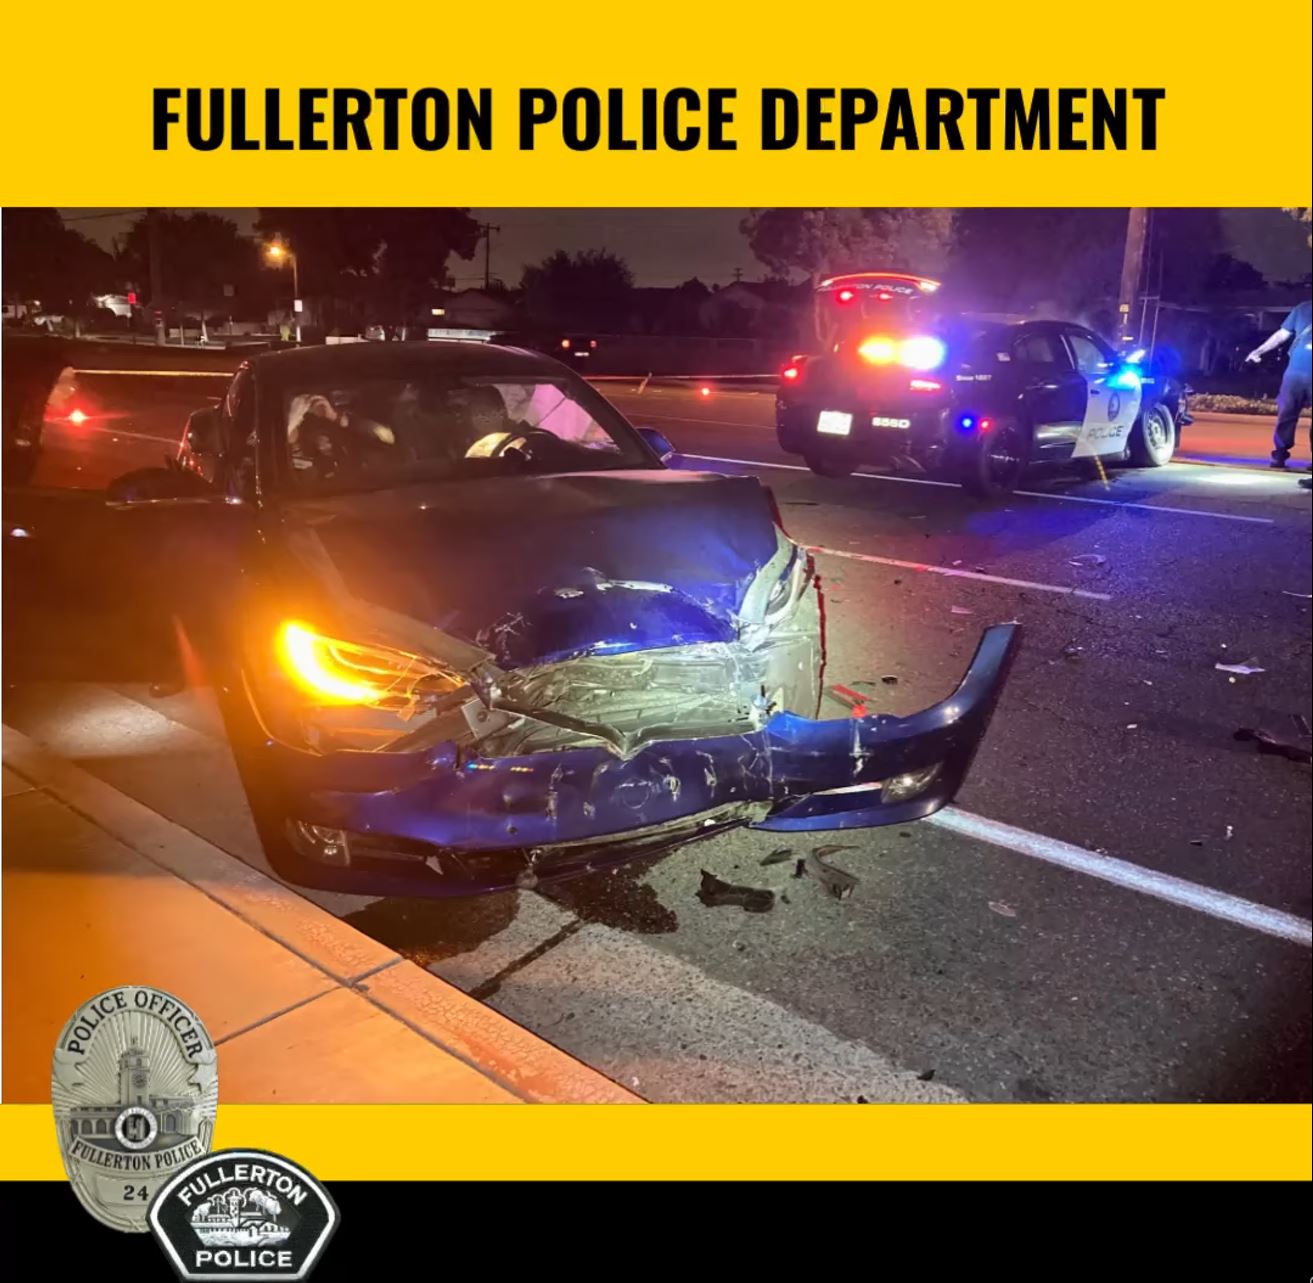 A Tesla in self-driving mode slammed into a police car in north Orange County – New Santa Ana